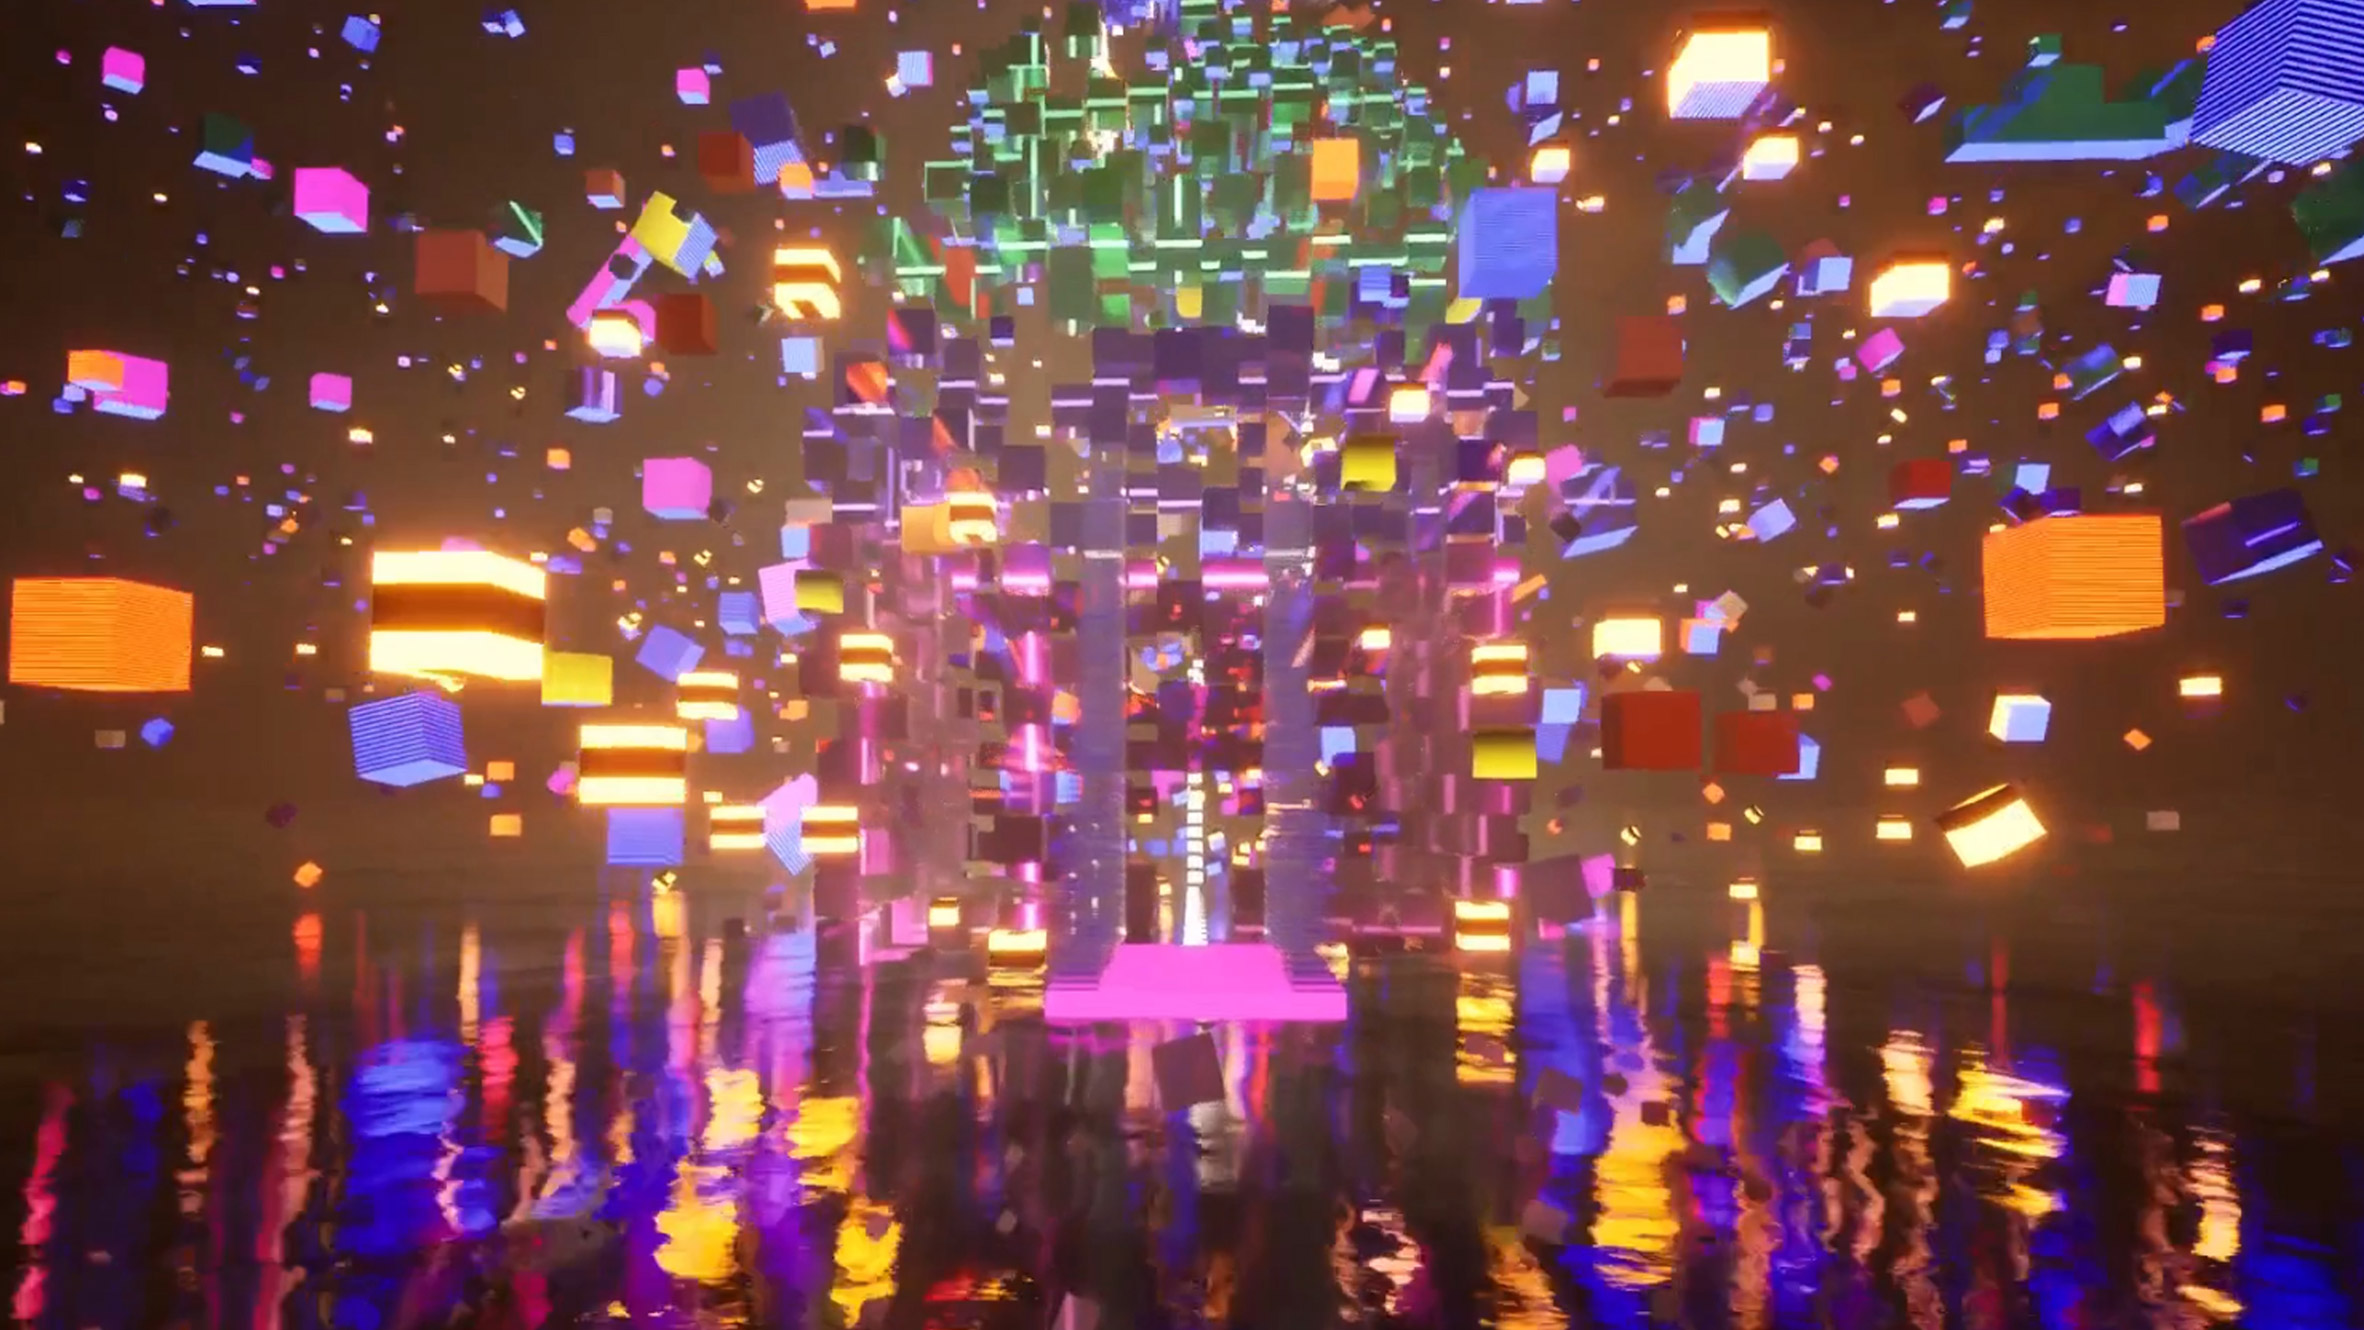 Visualisation of colourful video game